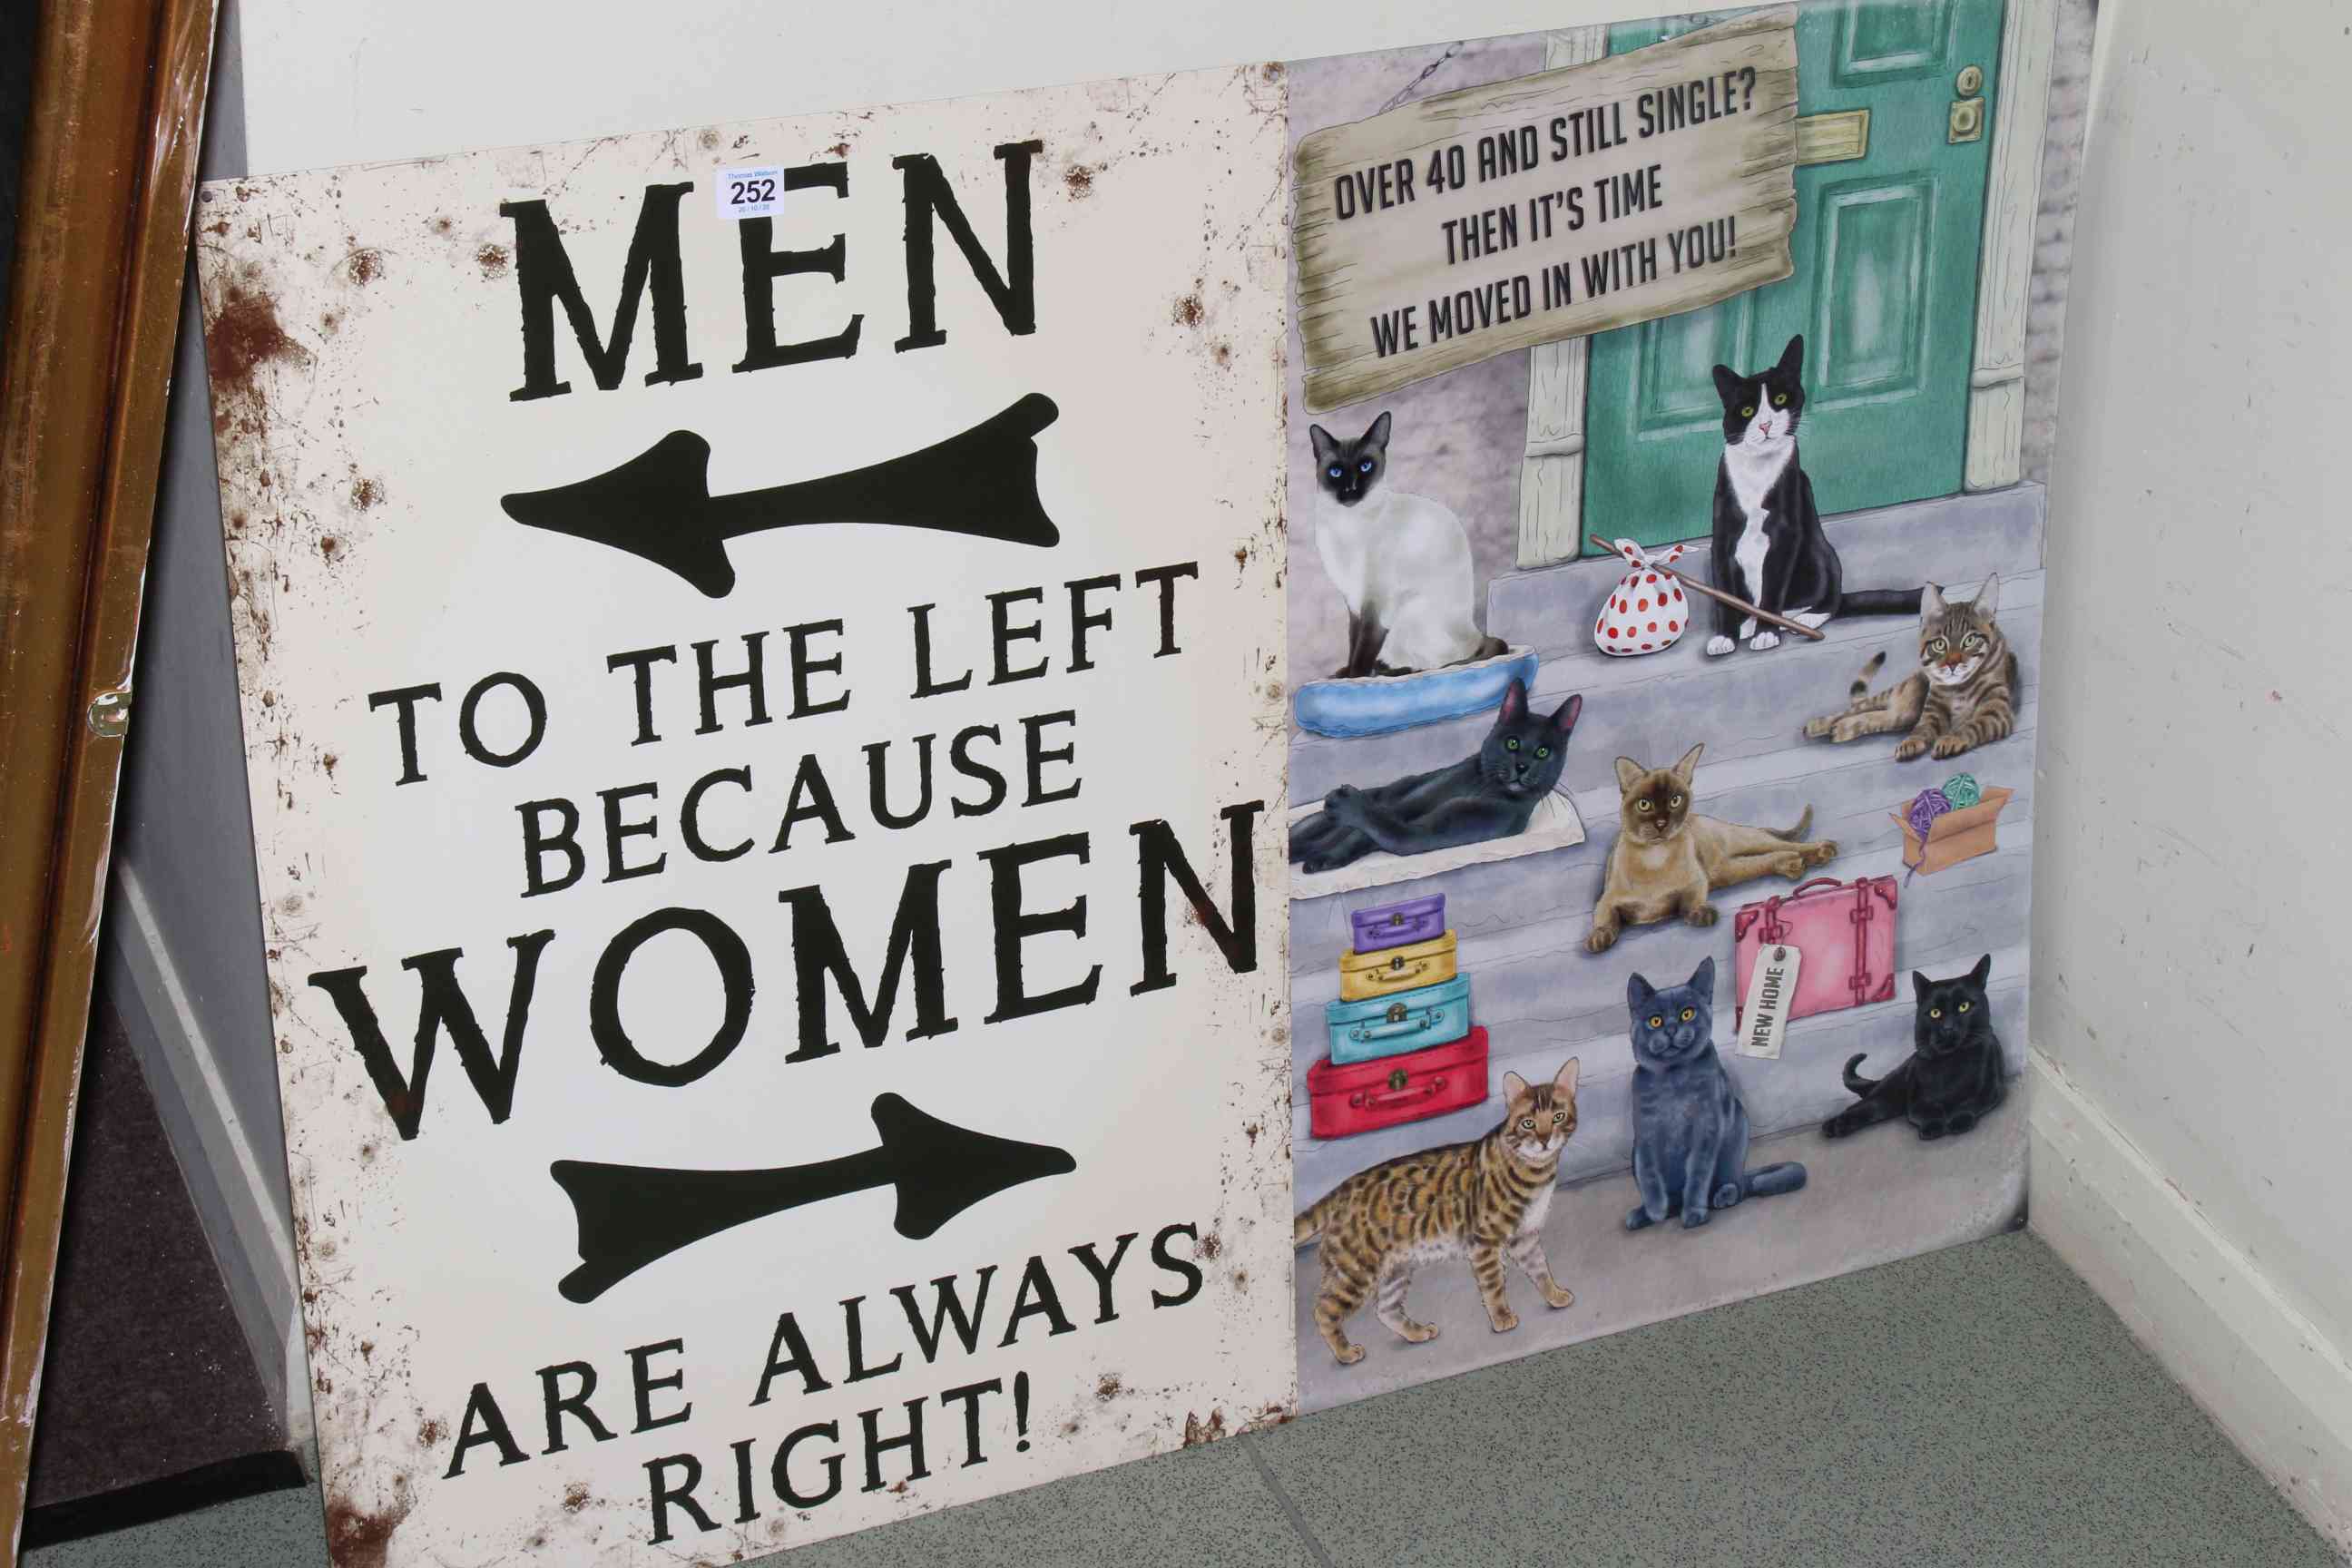 Two signs, Over 40 and Still Single and Men to the Left.